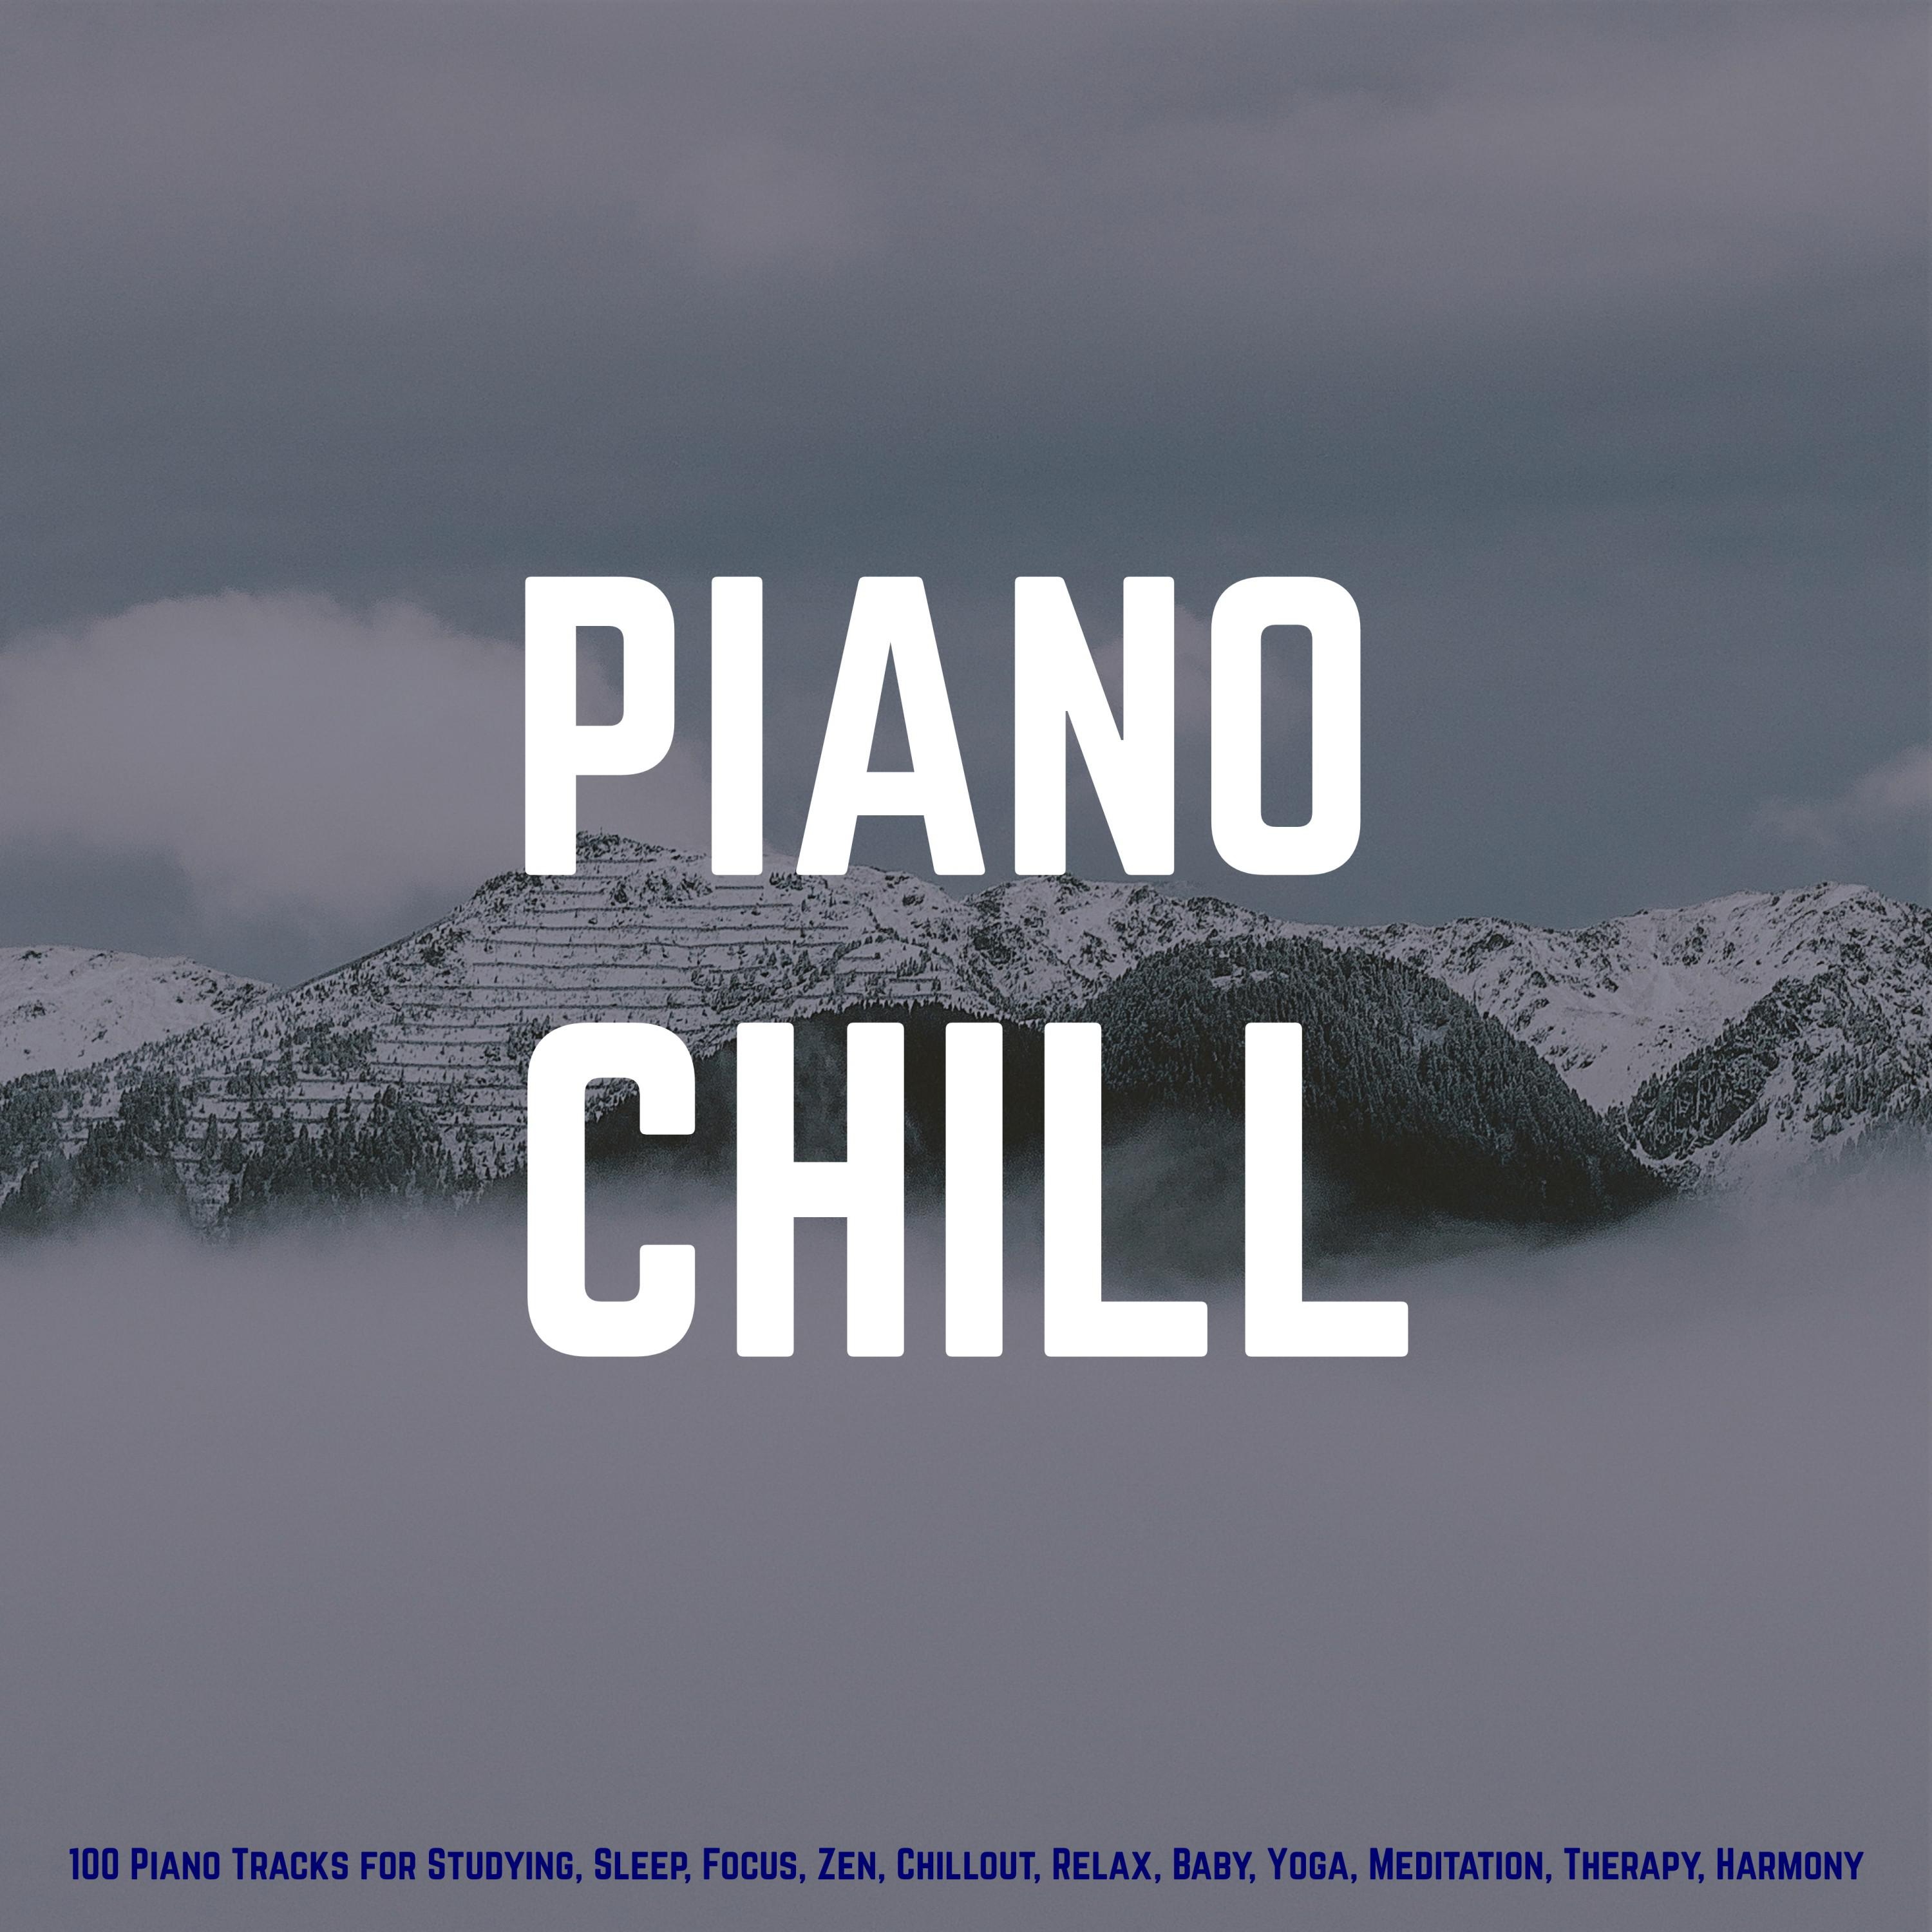 Piano Chill: 100 Piano Tracks for Studying, Sleep, Focus, Zen, Chillout, Relax, Baby, Yoga, Meditation, Therapy, Harmony